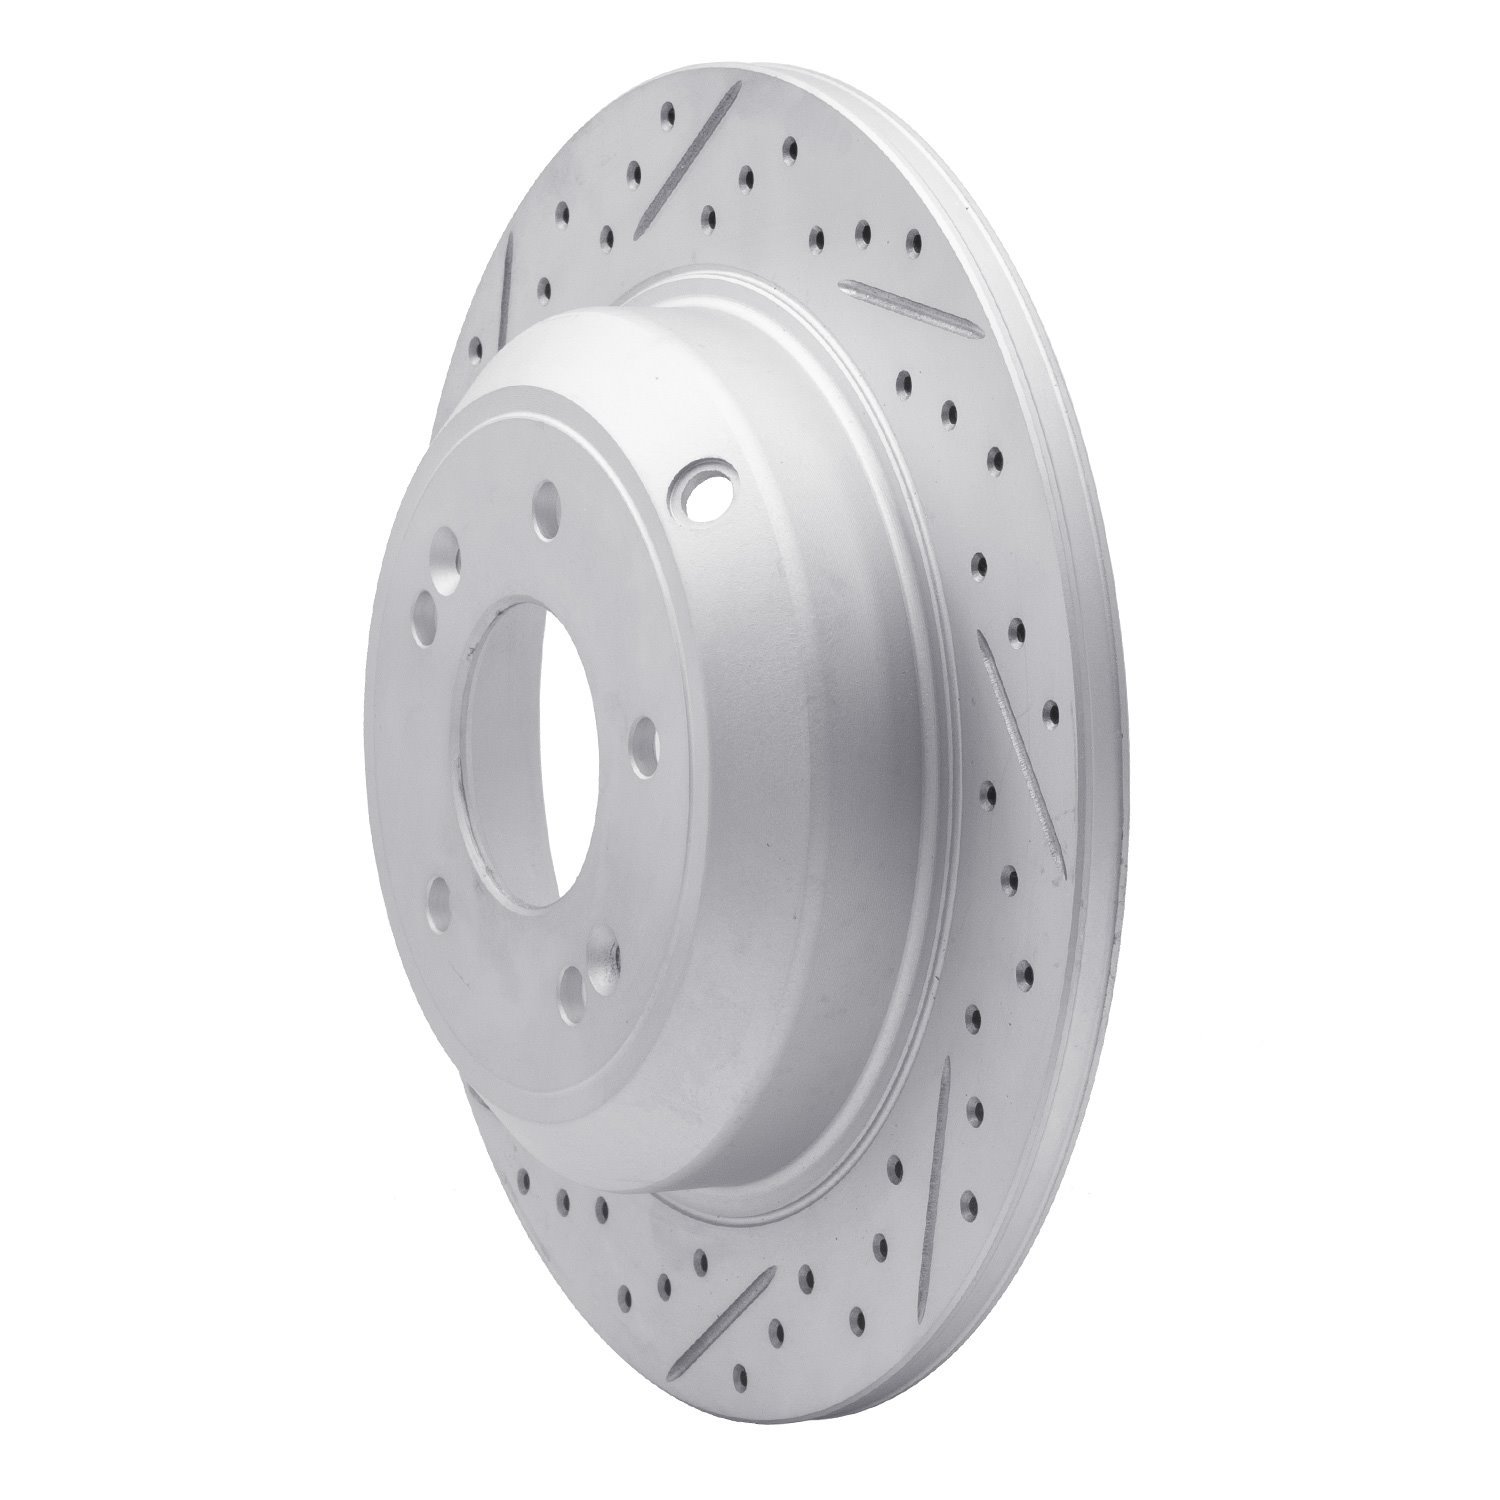 830-21041L Geoperformance Drilled/Slotted Brake Rotor, Fits Select Kia/Hyundai/Genesis, Position: Rear Left